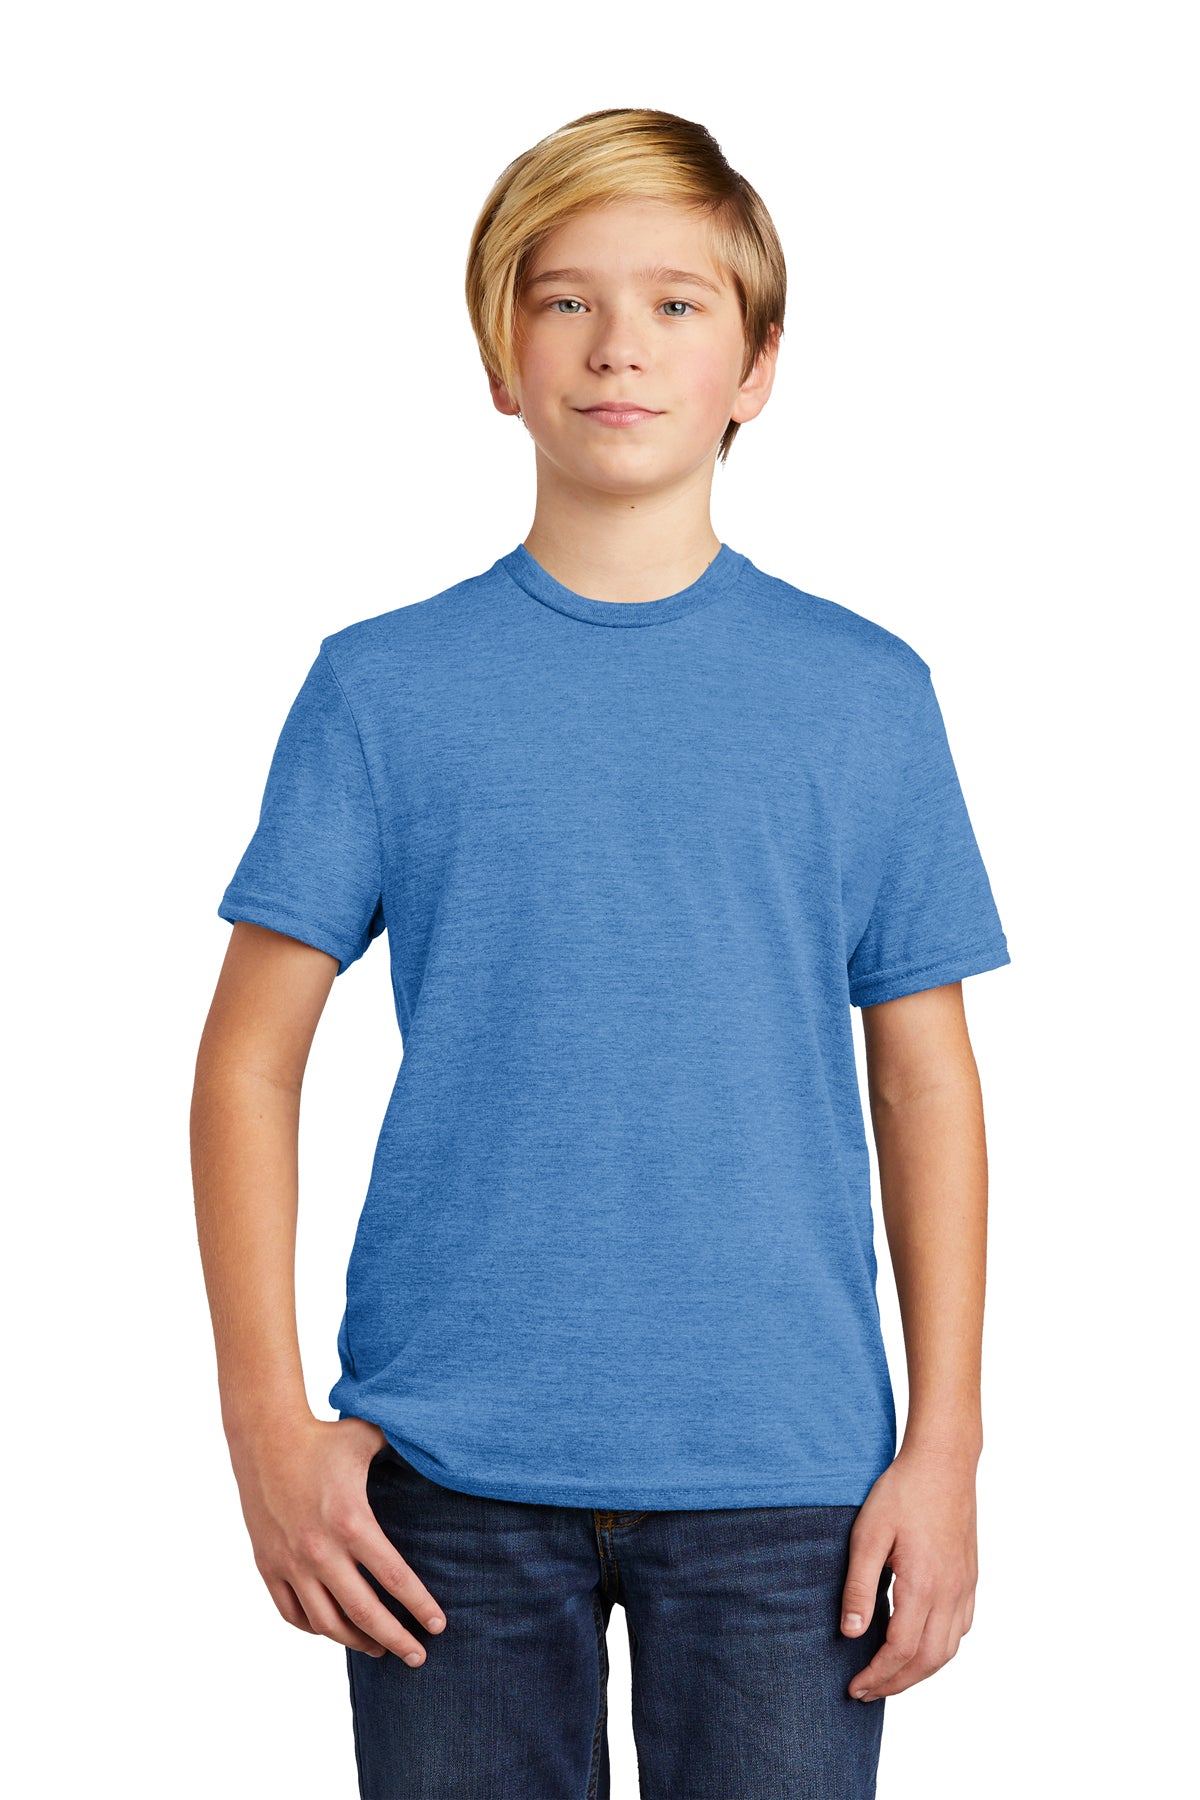 NEW STRAYER Allmade® Youth Tri-Blend Tee -  Azure Blue